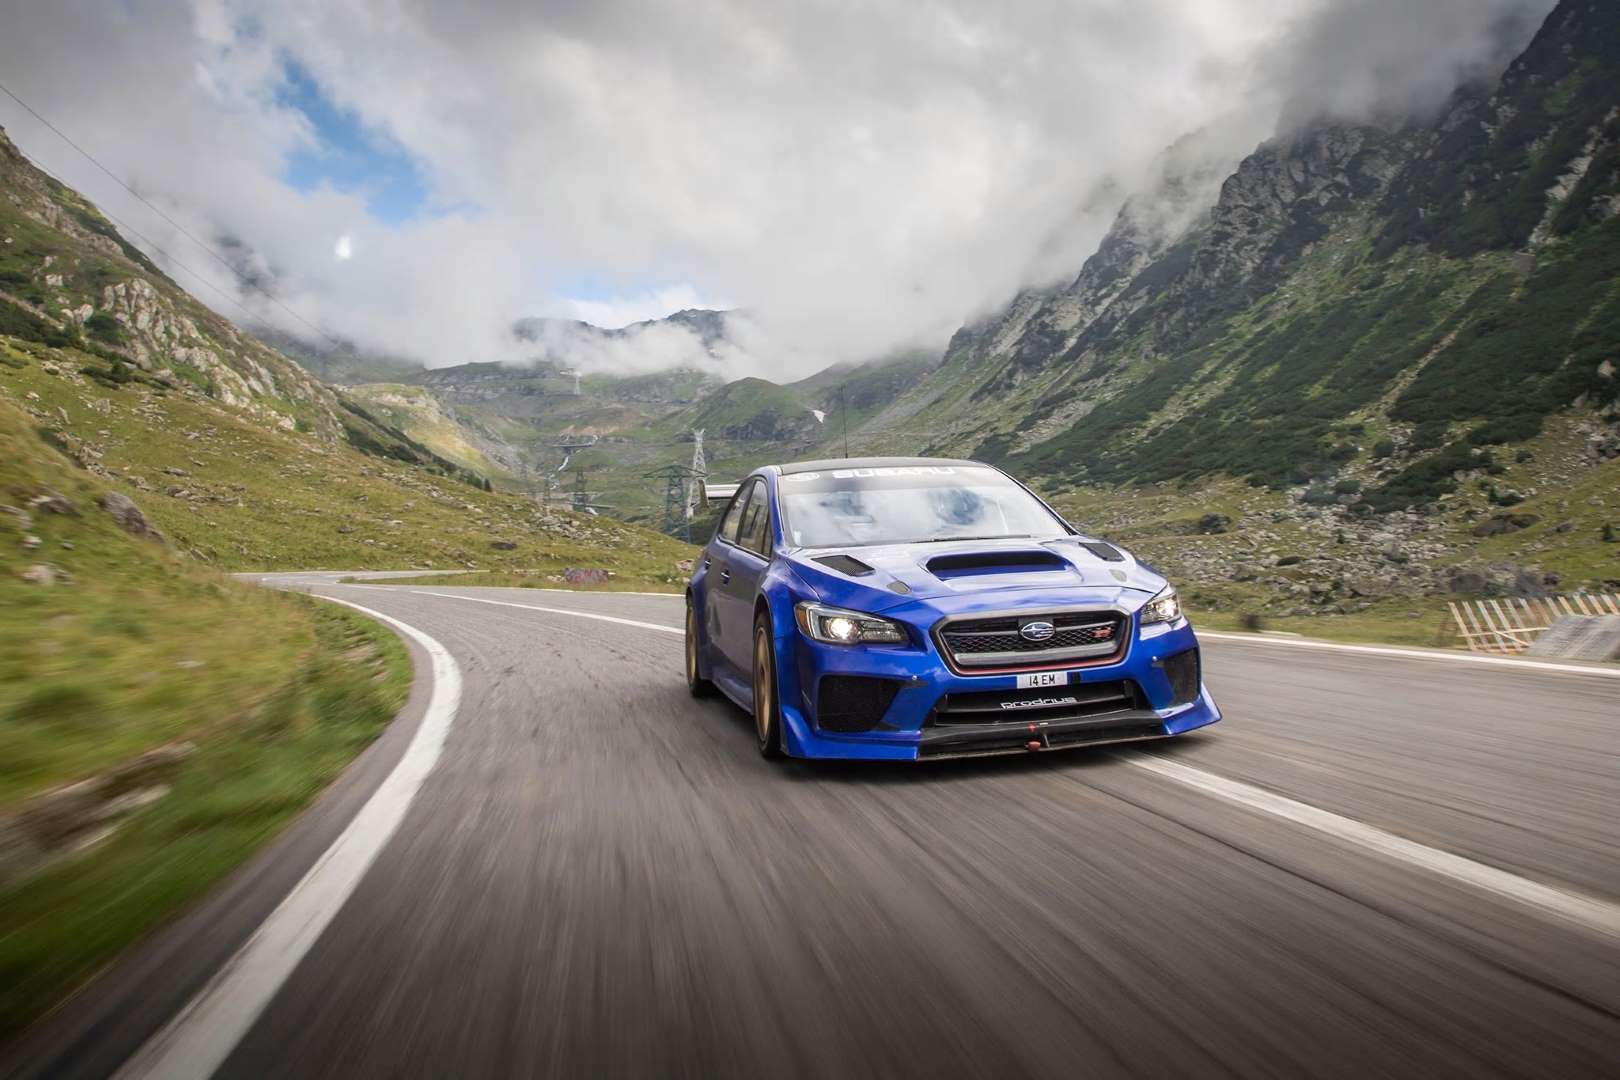 Attack Time: Subaru Makes a Record in Romania on ‘The Best Road in the World’